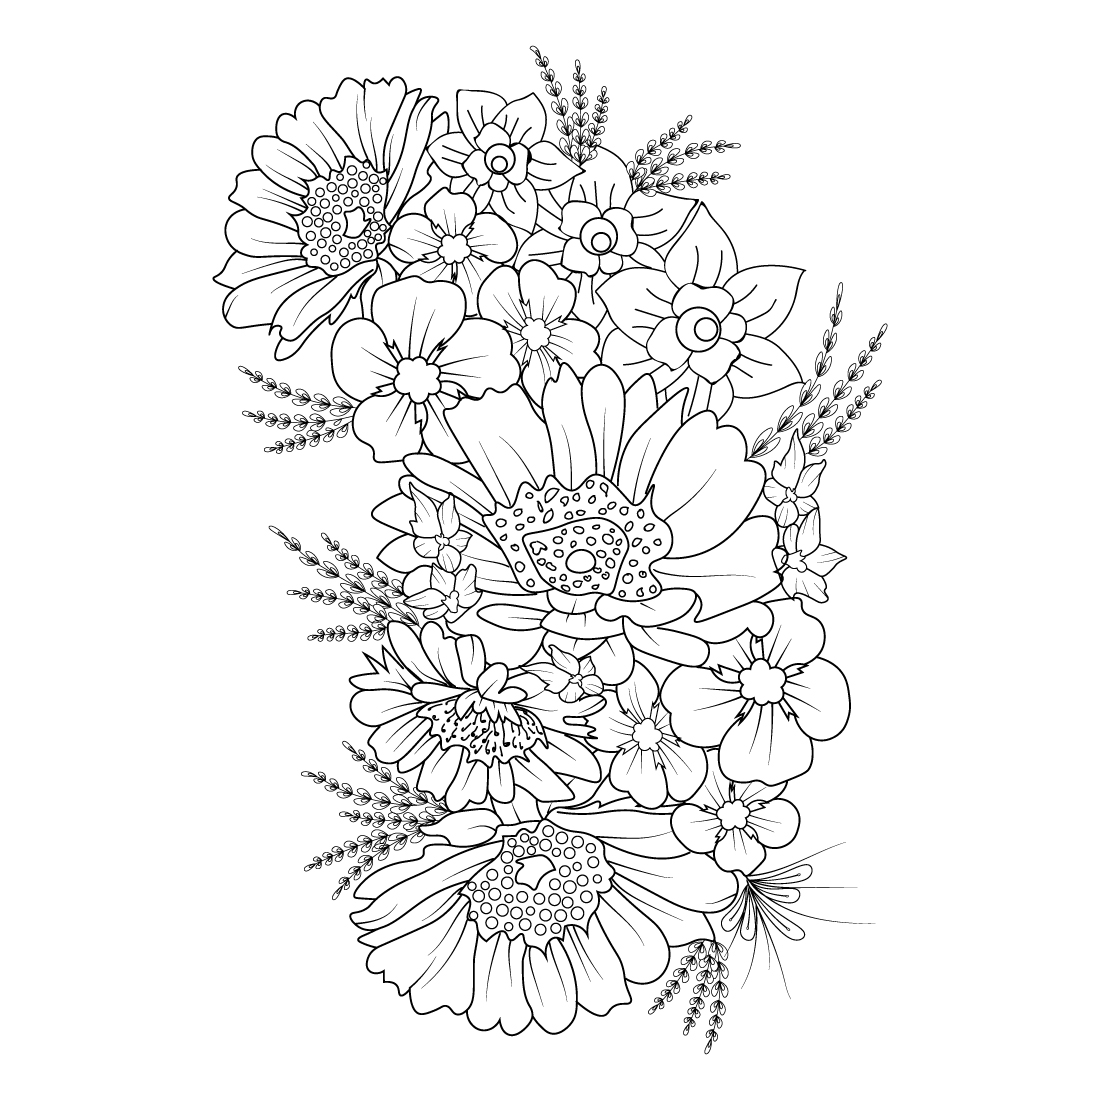 Composition of flower, leaves and berries sketch. | CanStock